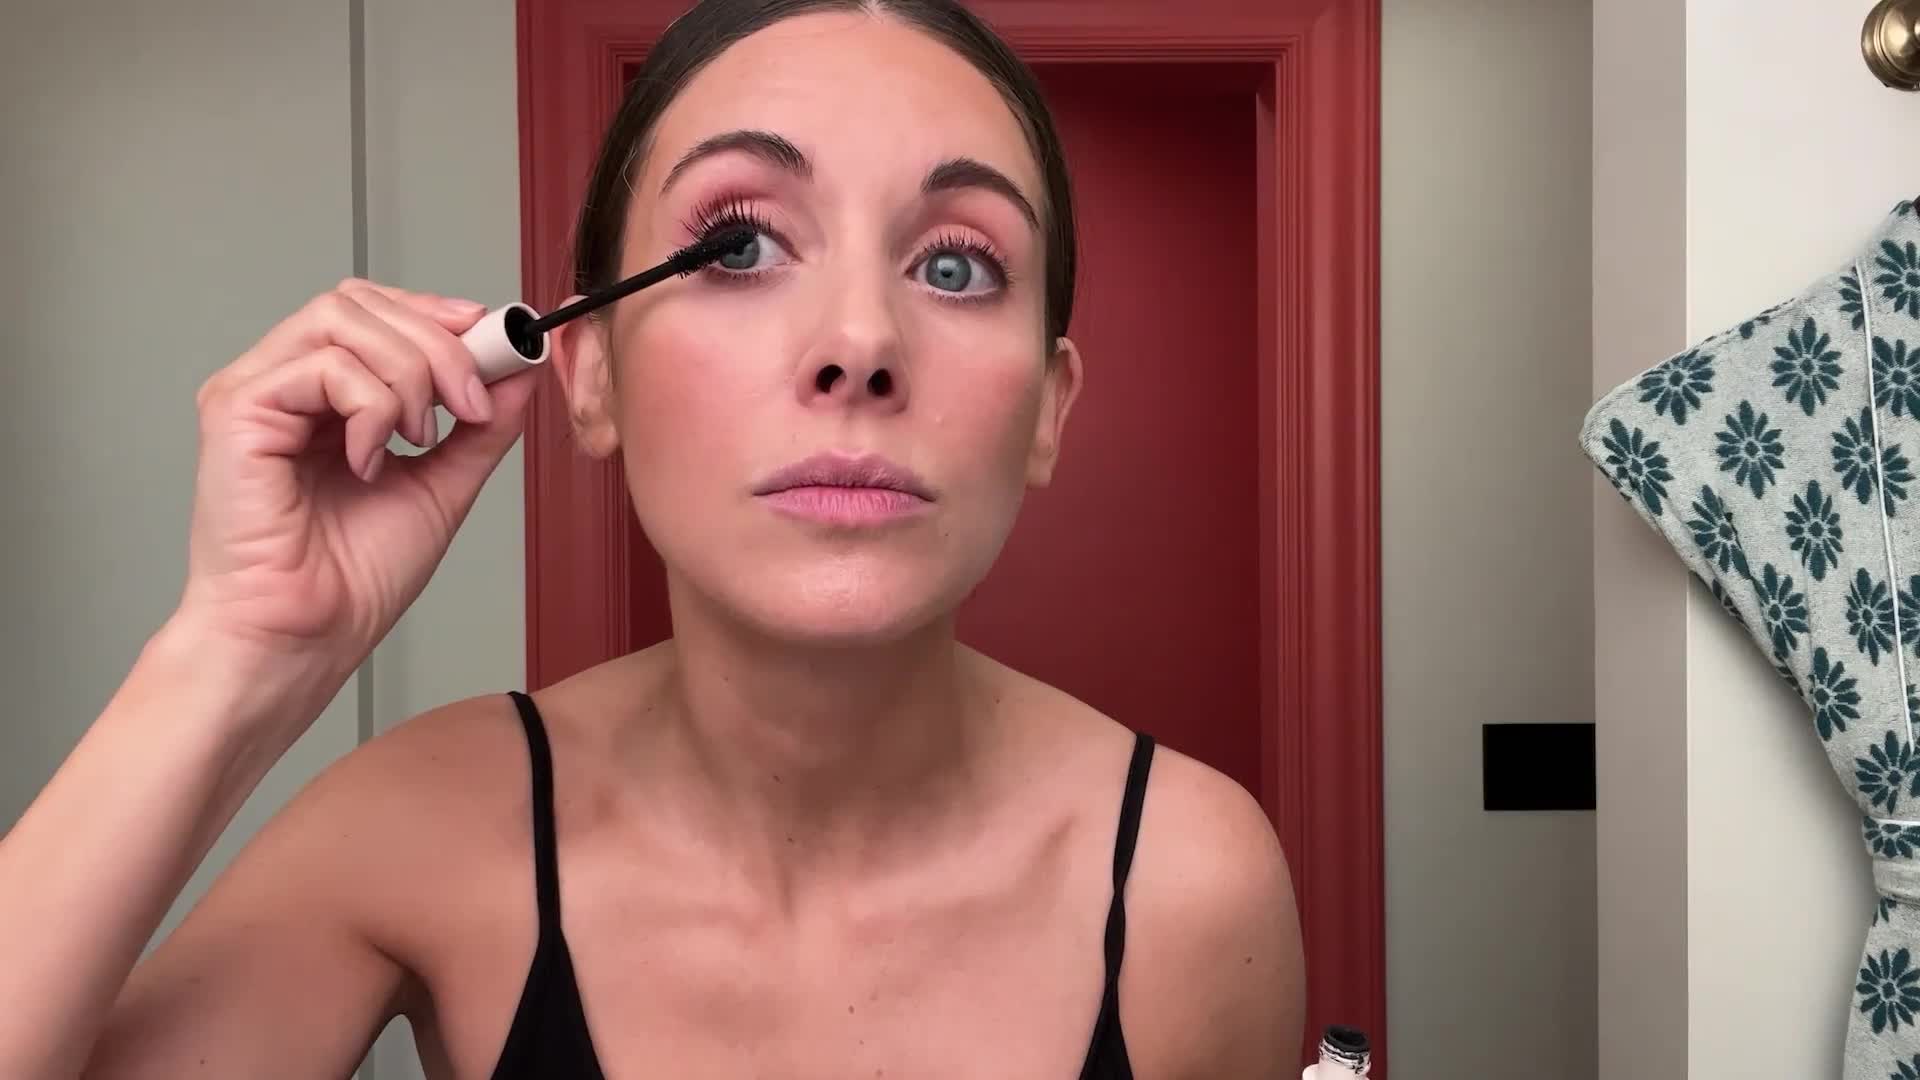 Watch Alison Brie's Guide to Post-Workout Skin Care and Date Night Makeup, Beauty Secrets